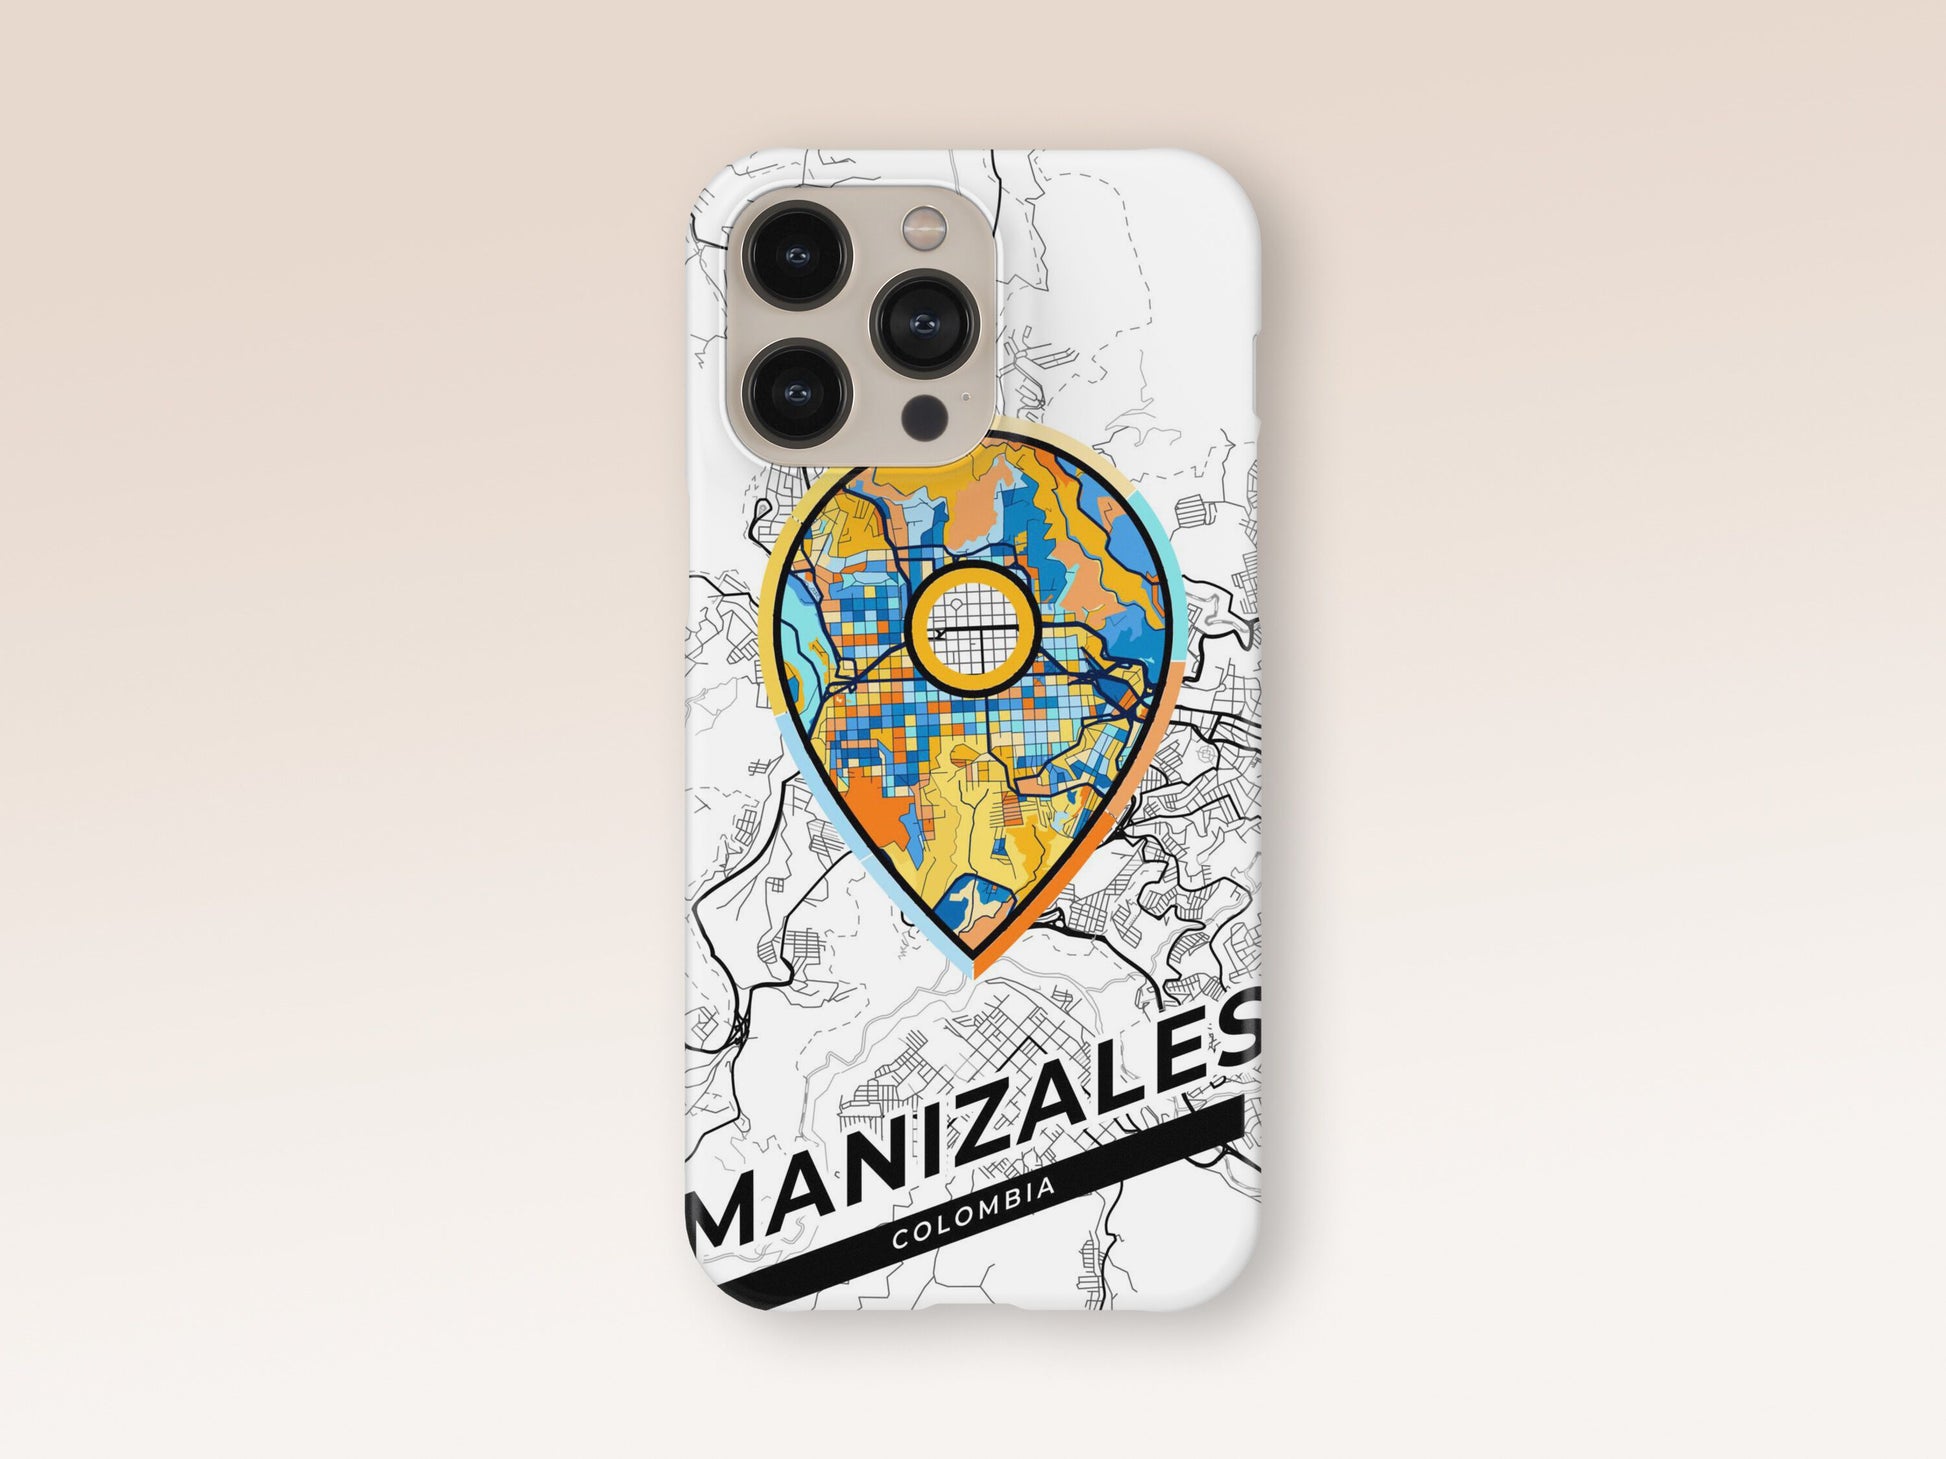 Manizales Colombia slim phone case with colorful icon. Birthday, wedding or housewarming gift. Couple match cases. 1